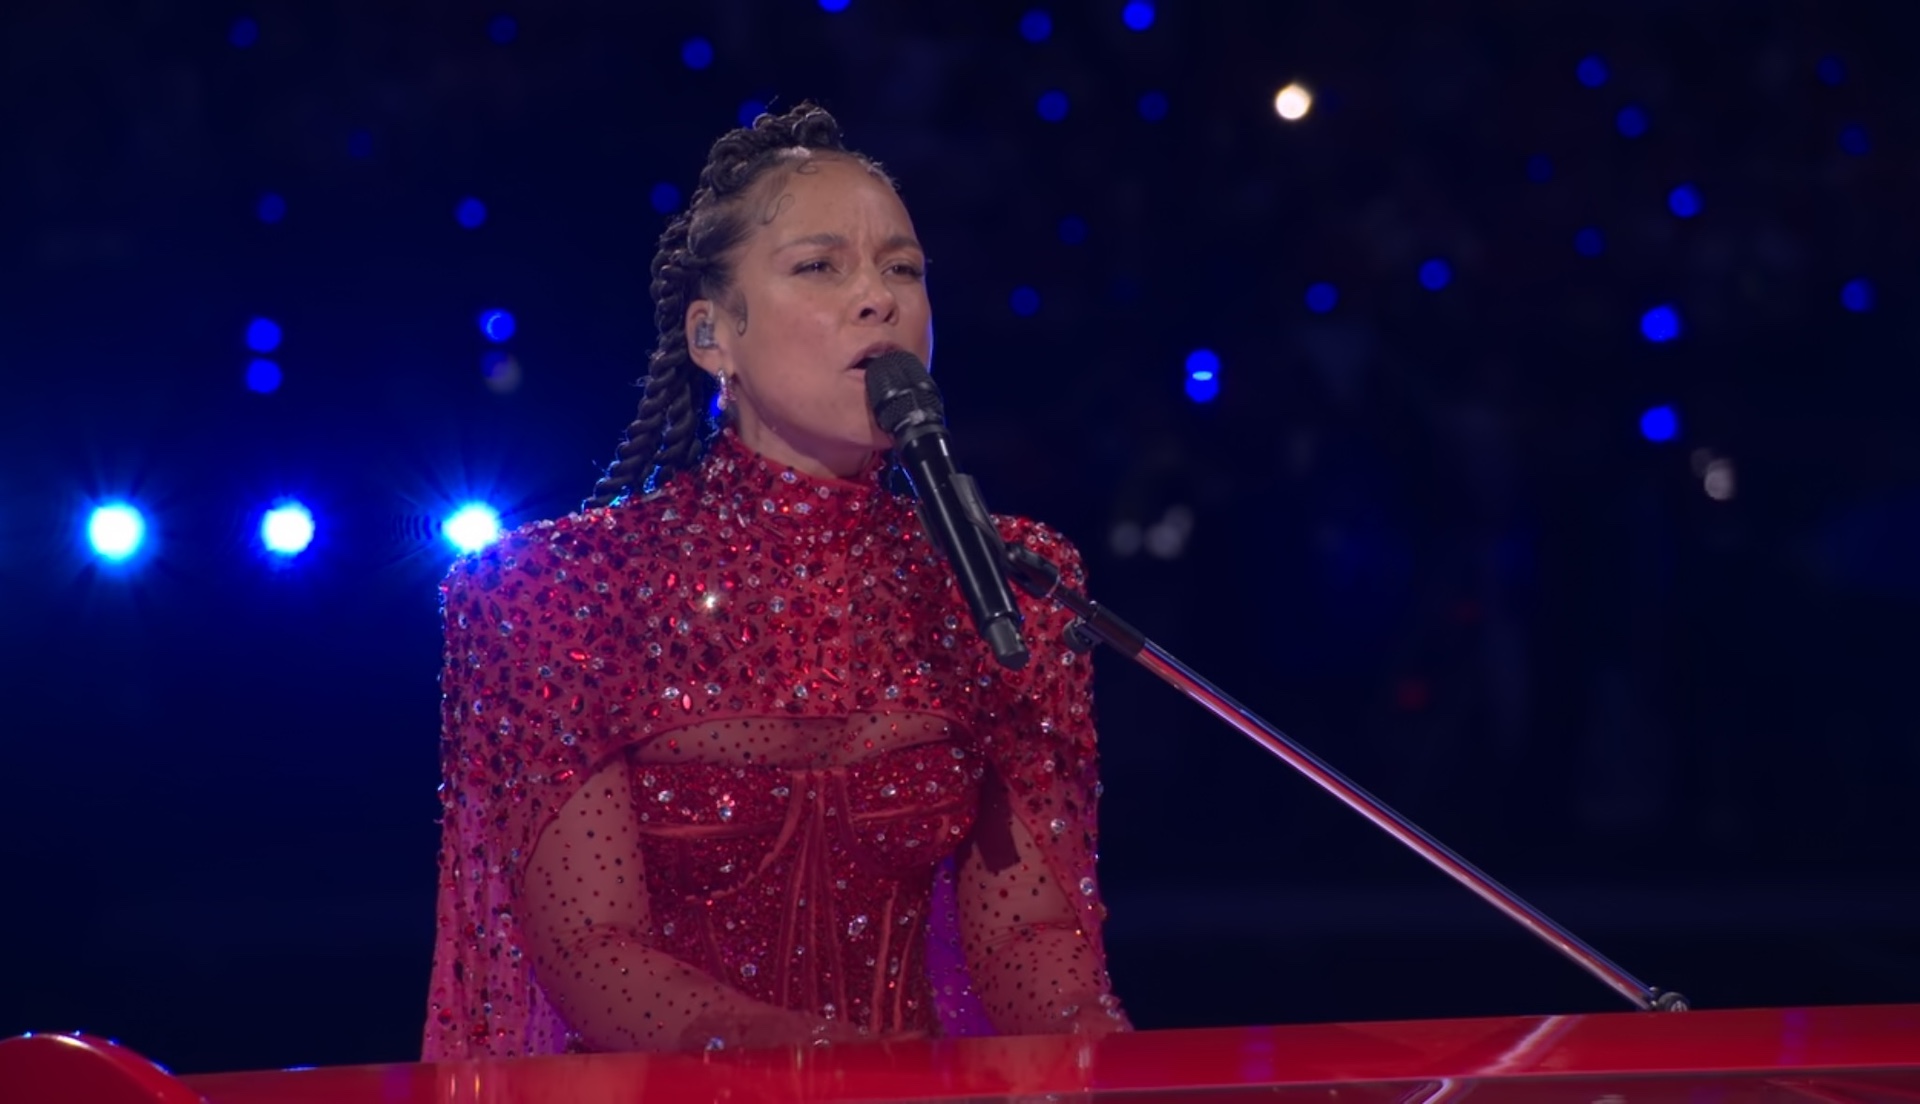 If Alicia Keys's voice cracks at the Super Bowl, but it's edited out, did  it even happen?